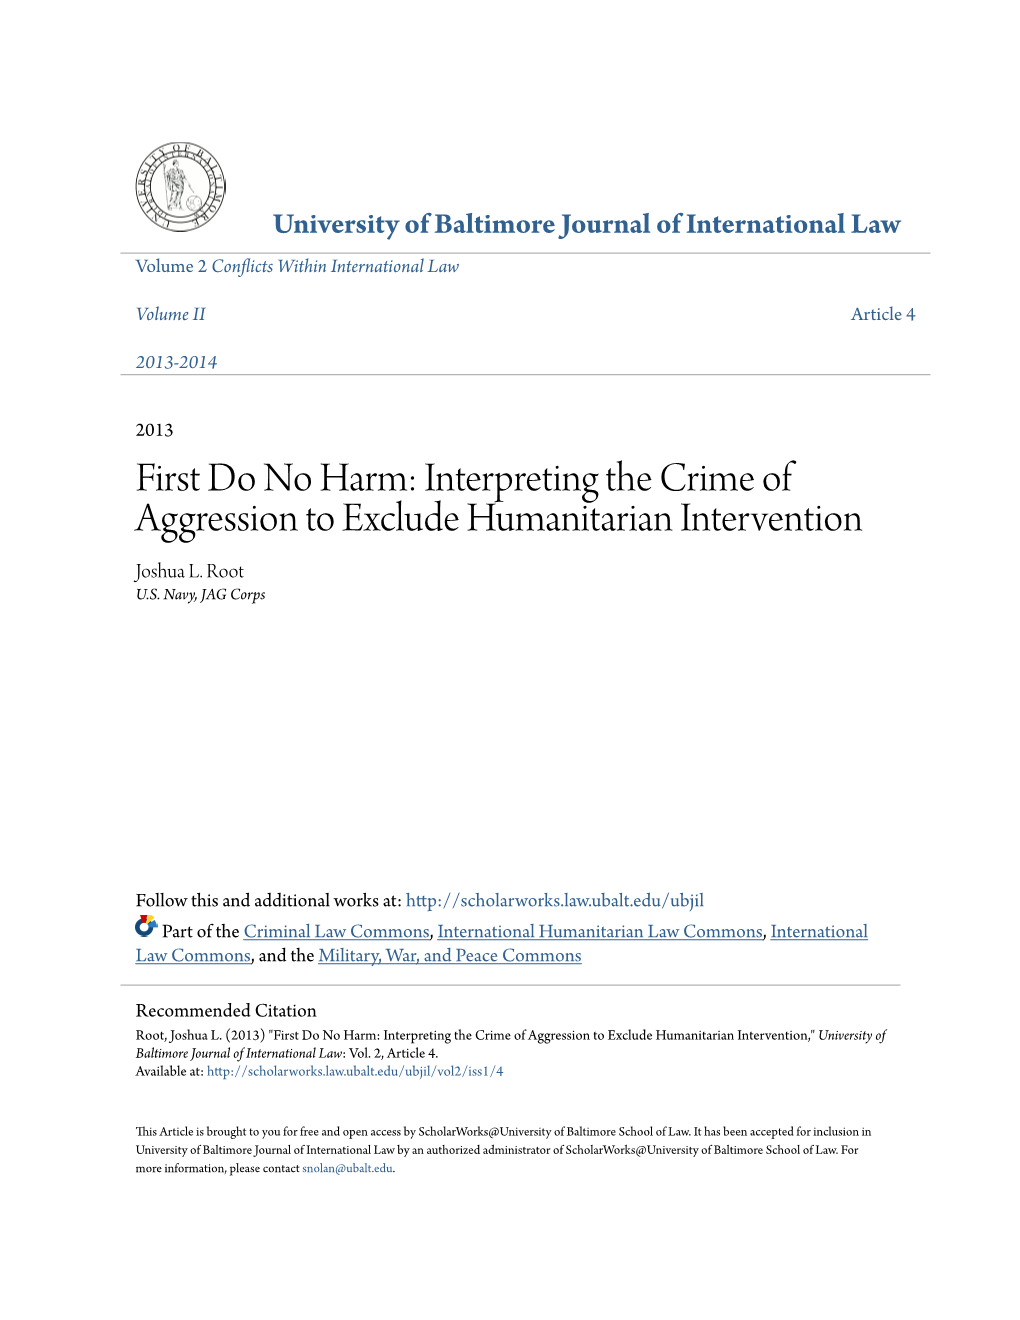 Interpreting the Crime of Aggression to Exclude Humanitarian Intervention Joshua L